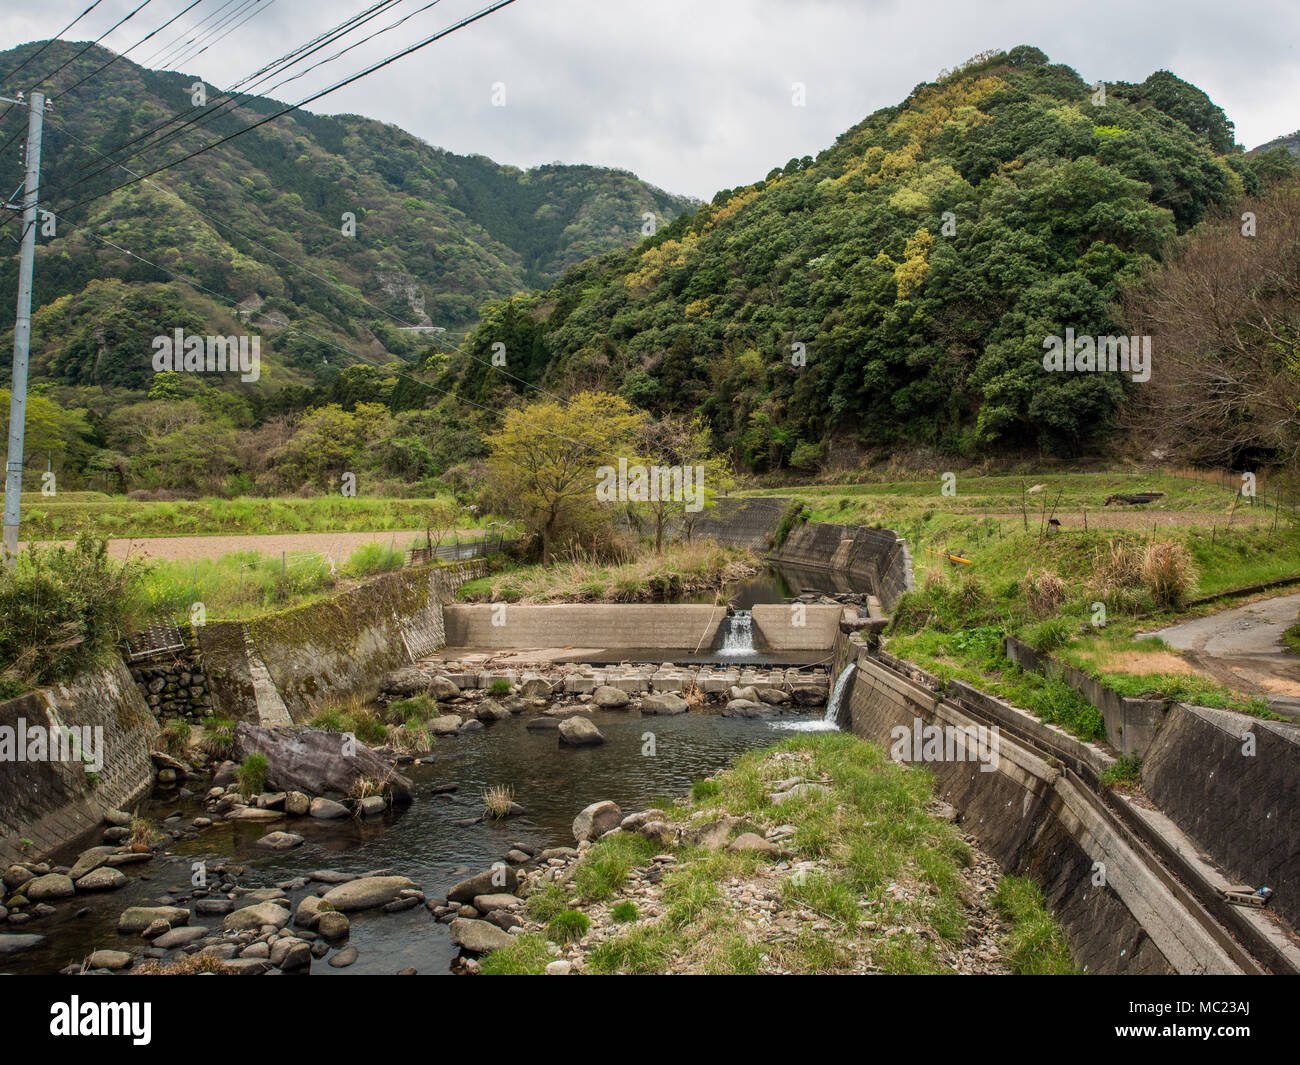 Rural landscape with concrete flood protection and river management construction, Kunisaki, Oita, Kyushu, Japan Stock Photo